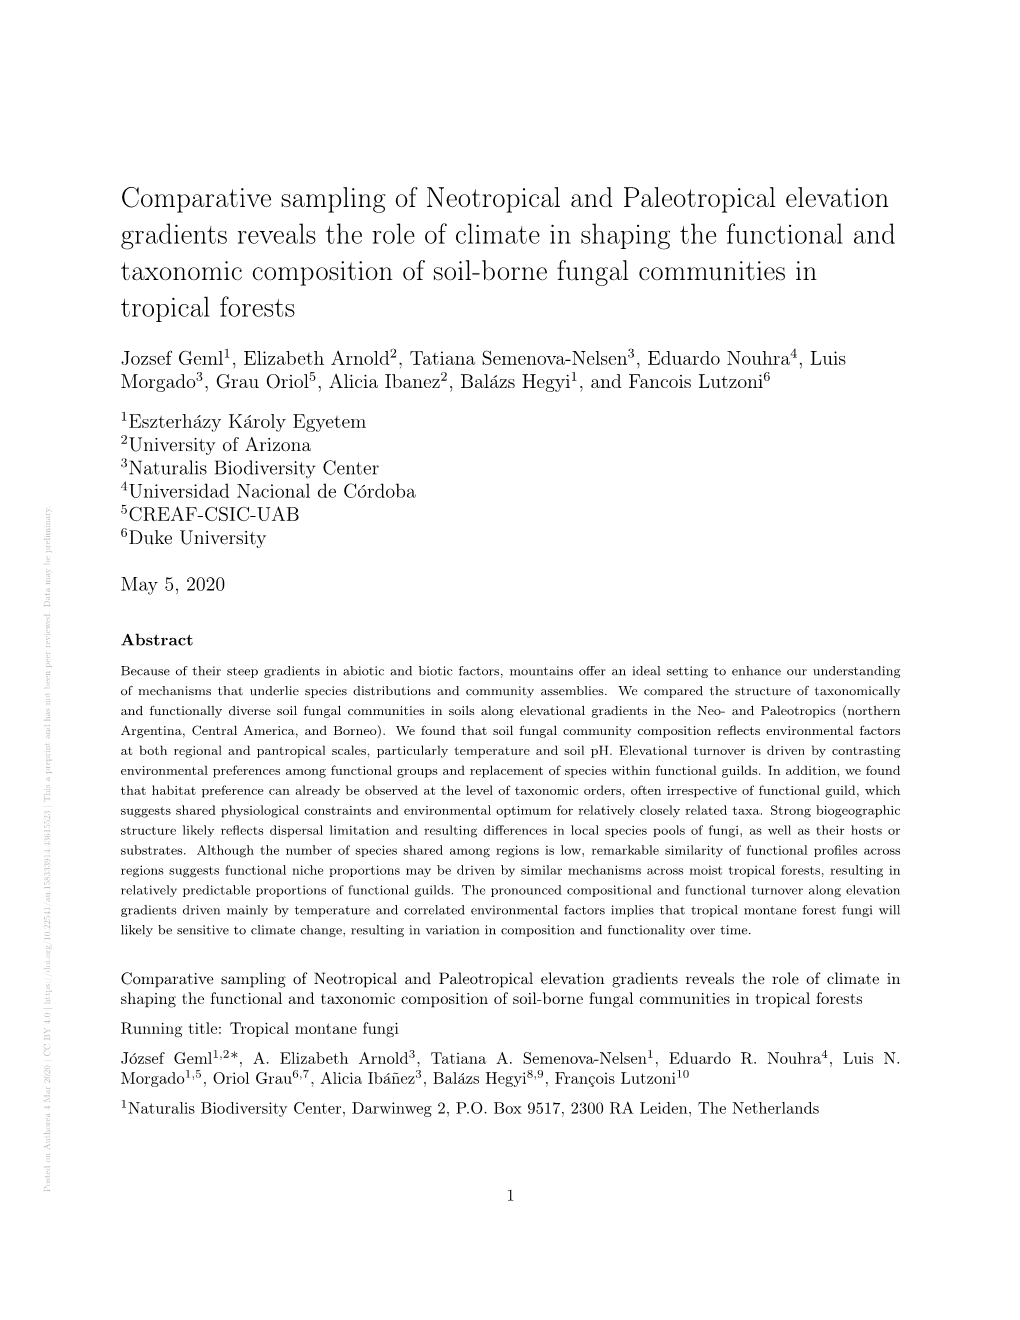 Comparative Sampling of Neotropical and Paleotropical